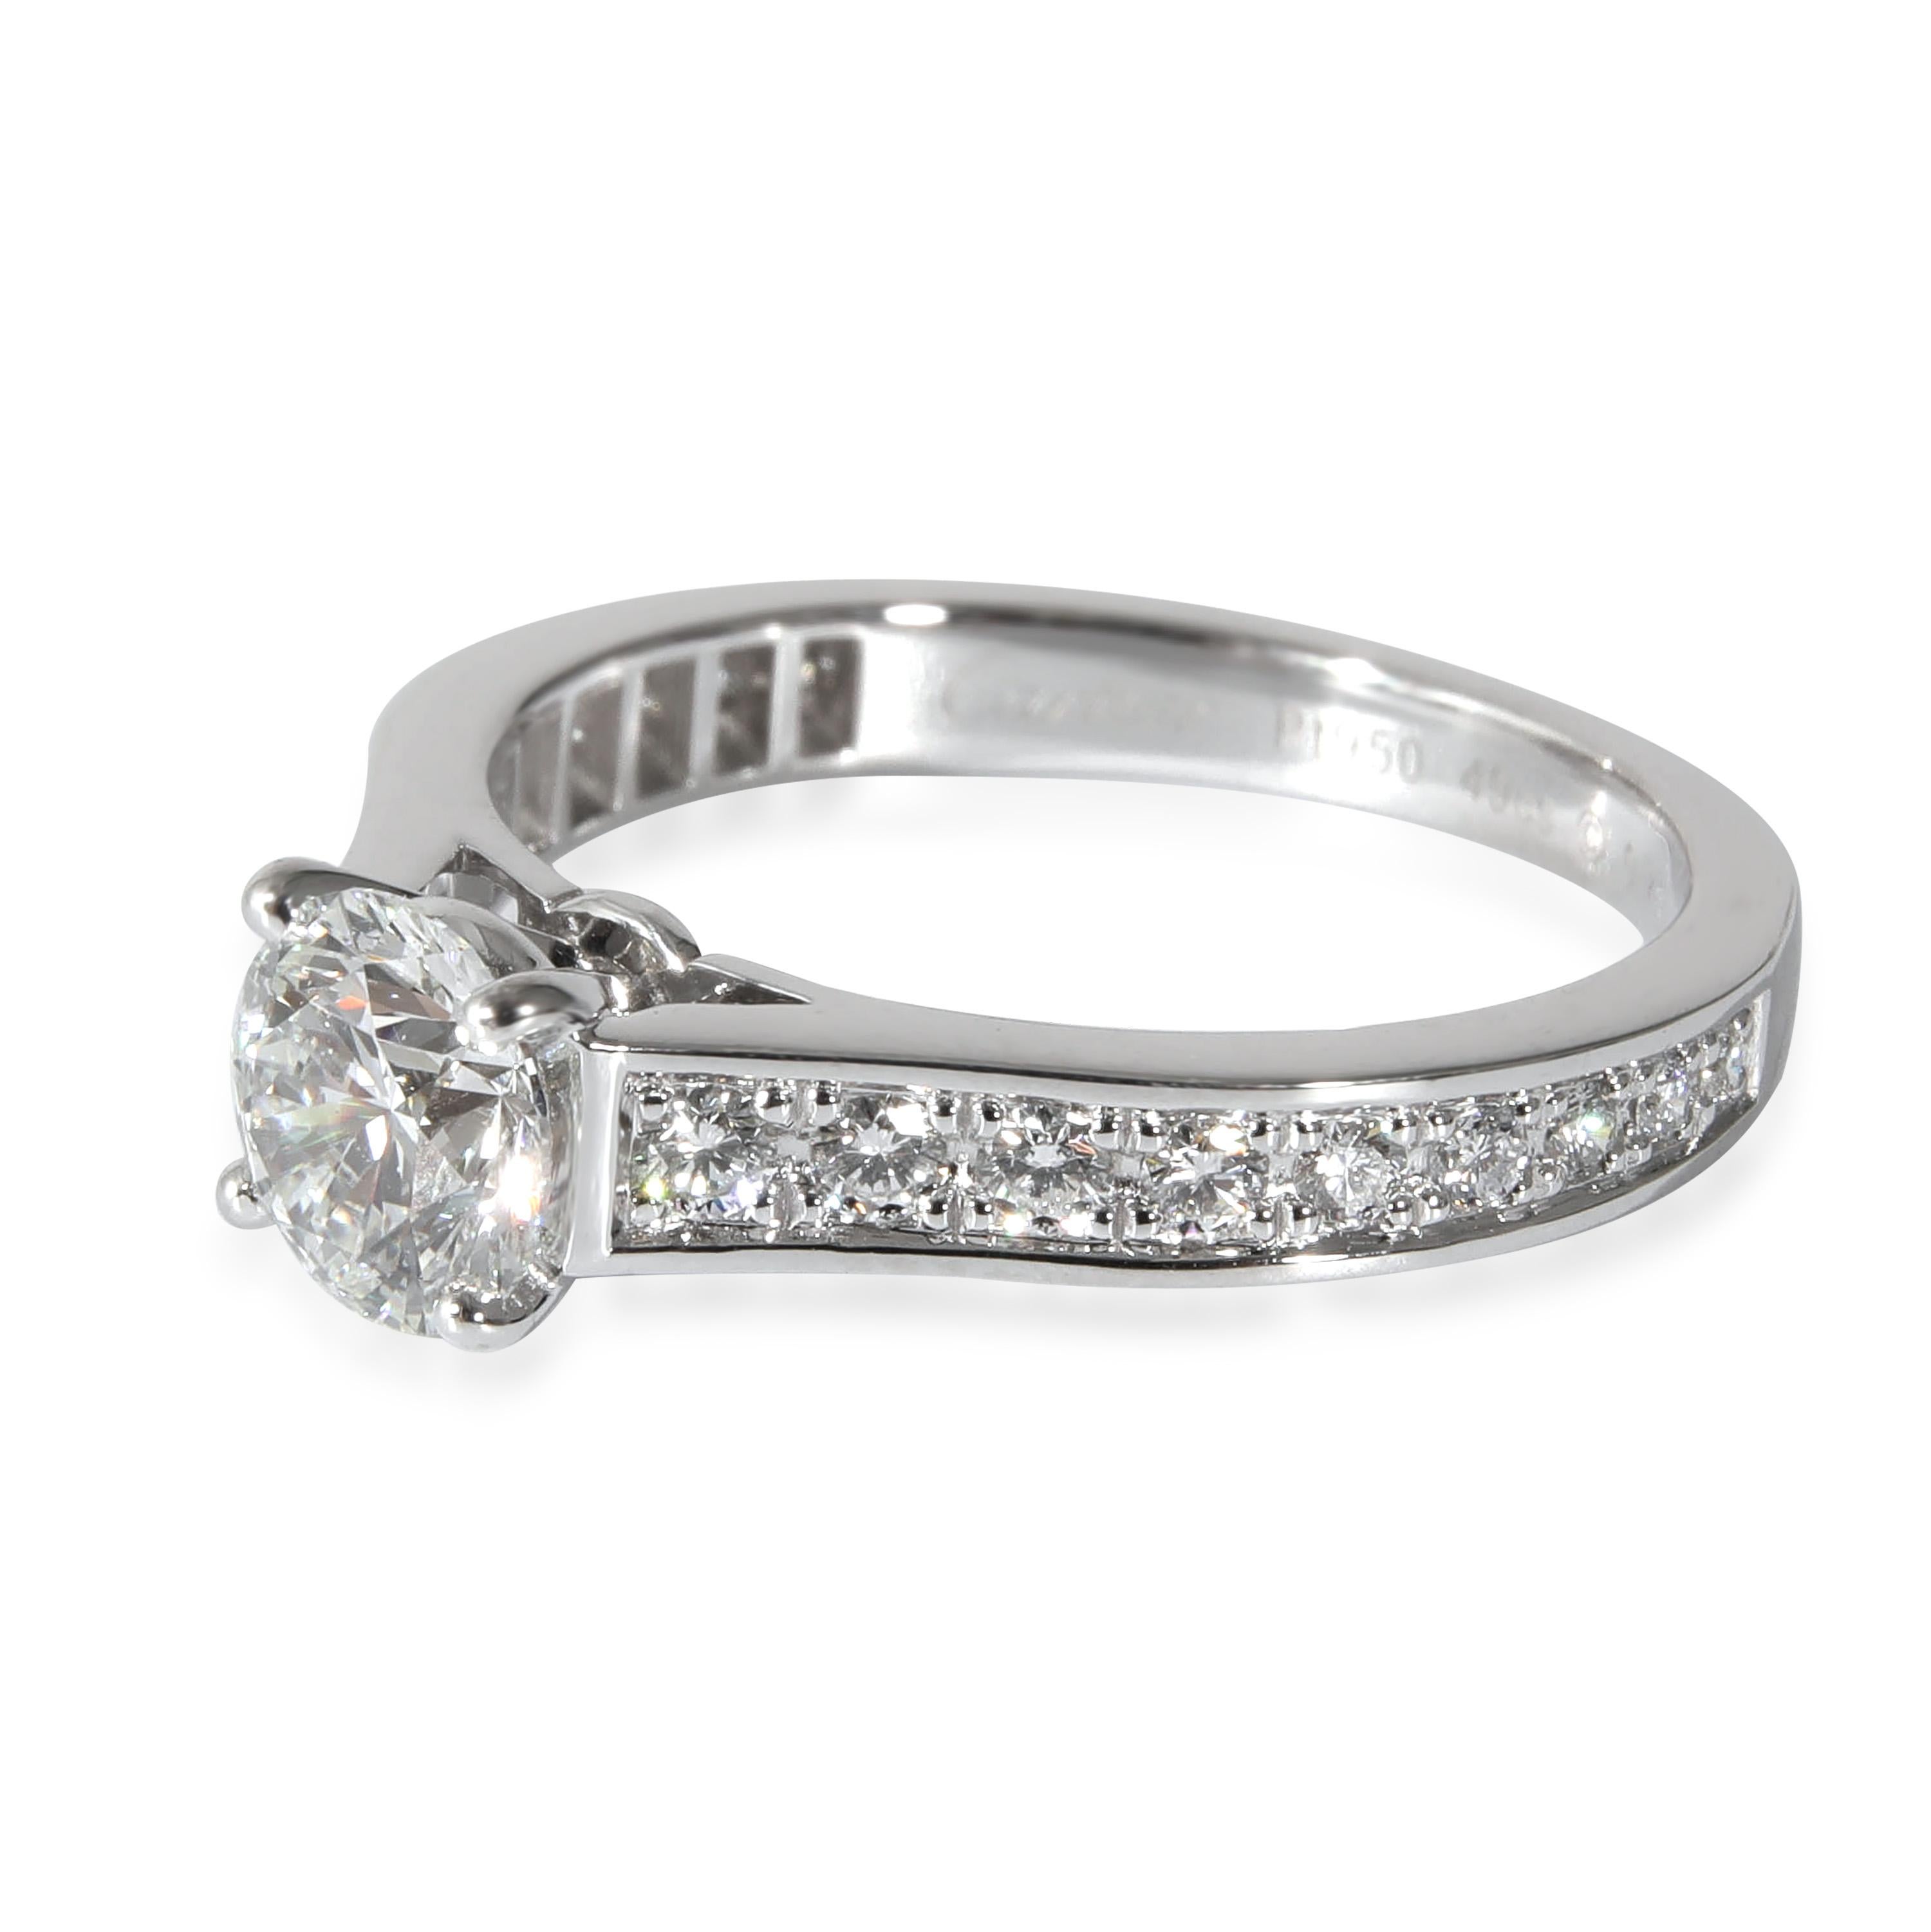 Cartier 1895 Diamond Engagement Ring in  Platinum G VS1 1 CTW

PRIMARY DETAILS
SKU: 132293
Listing Title: Cartier 1895 Diamond Engagement Ring in  Platinum G VS1 1 CTW
Condition Description: A collection that started with a ring. The solitaire